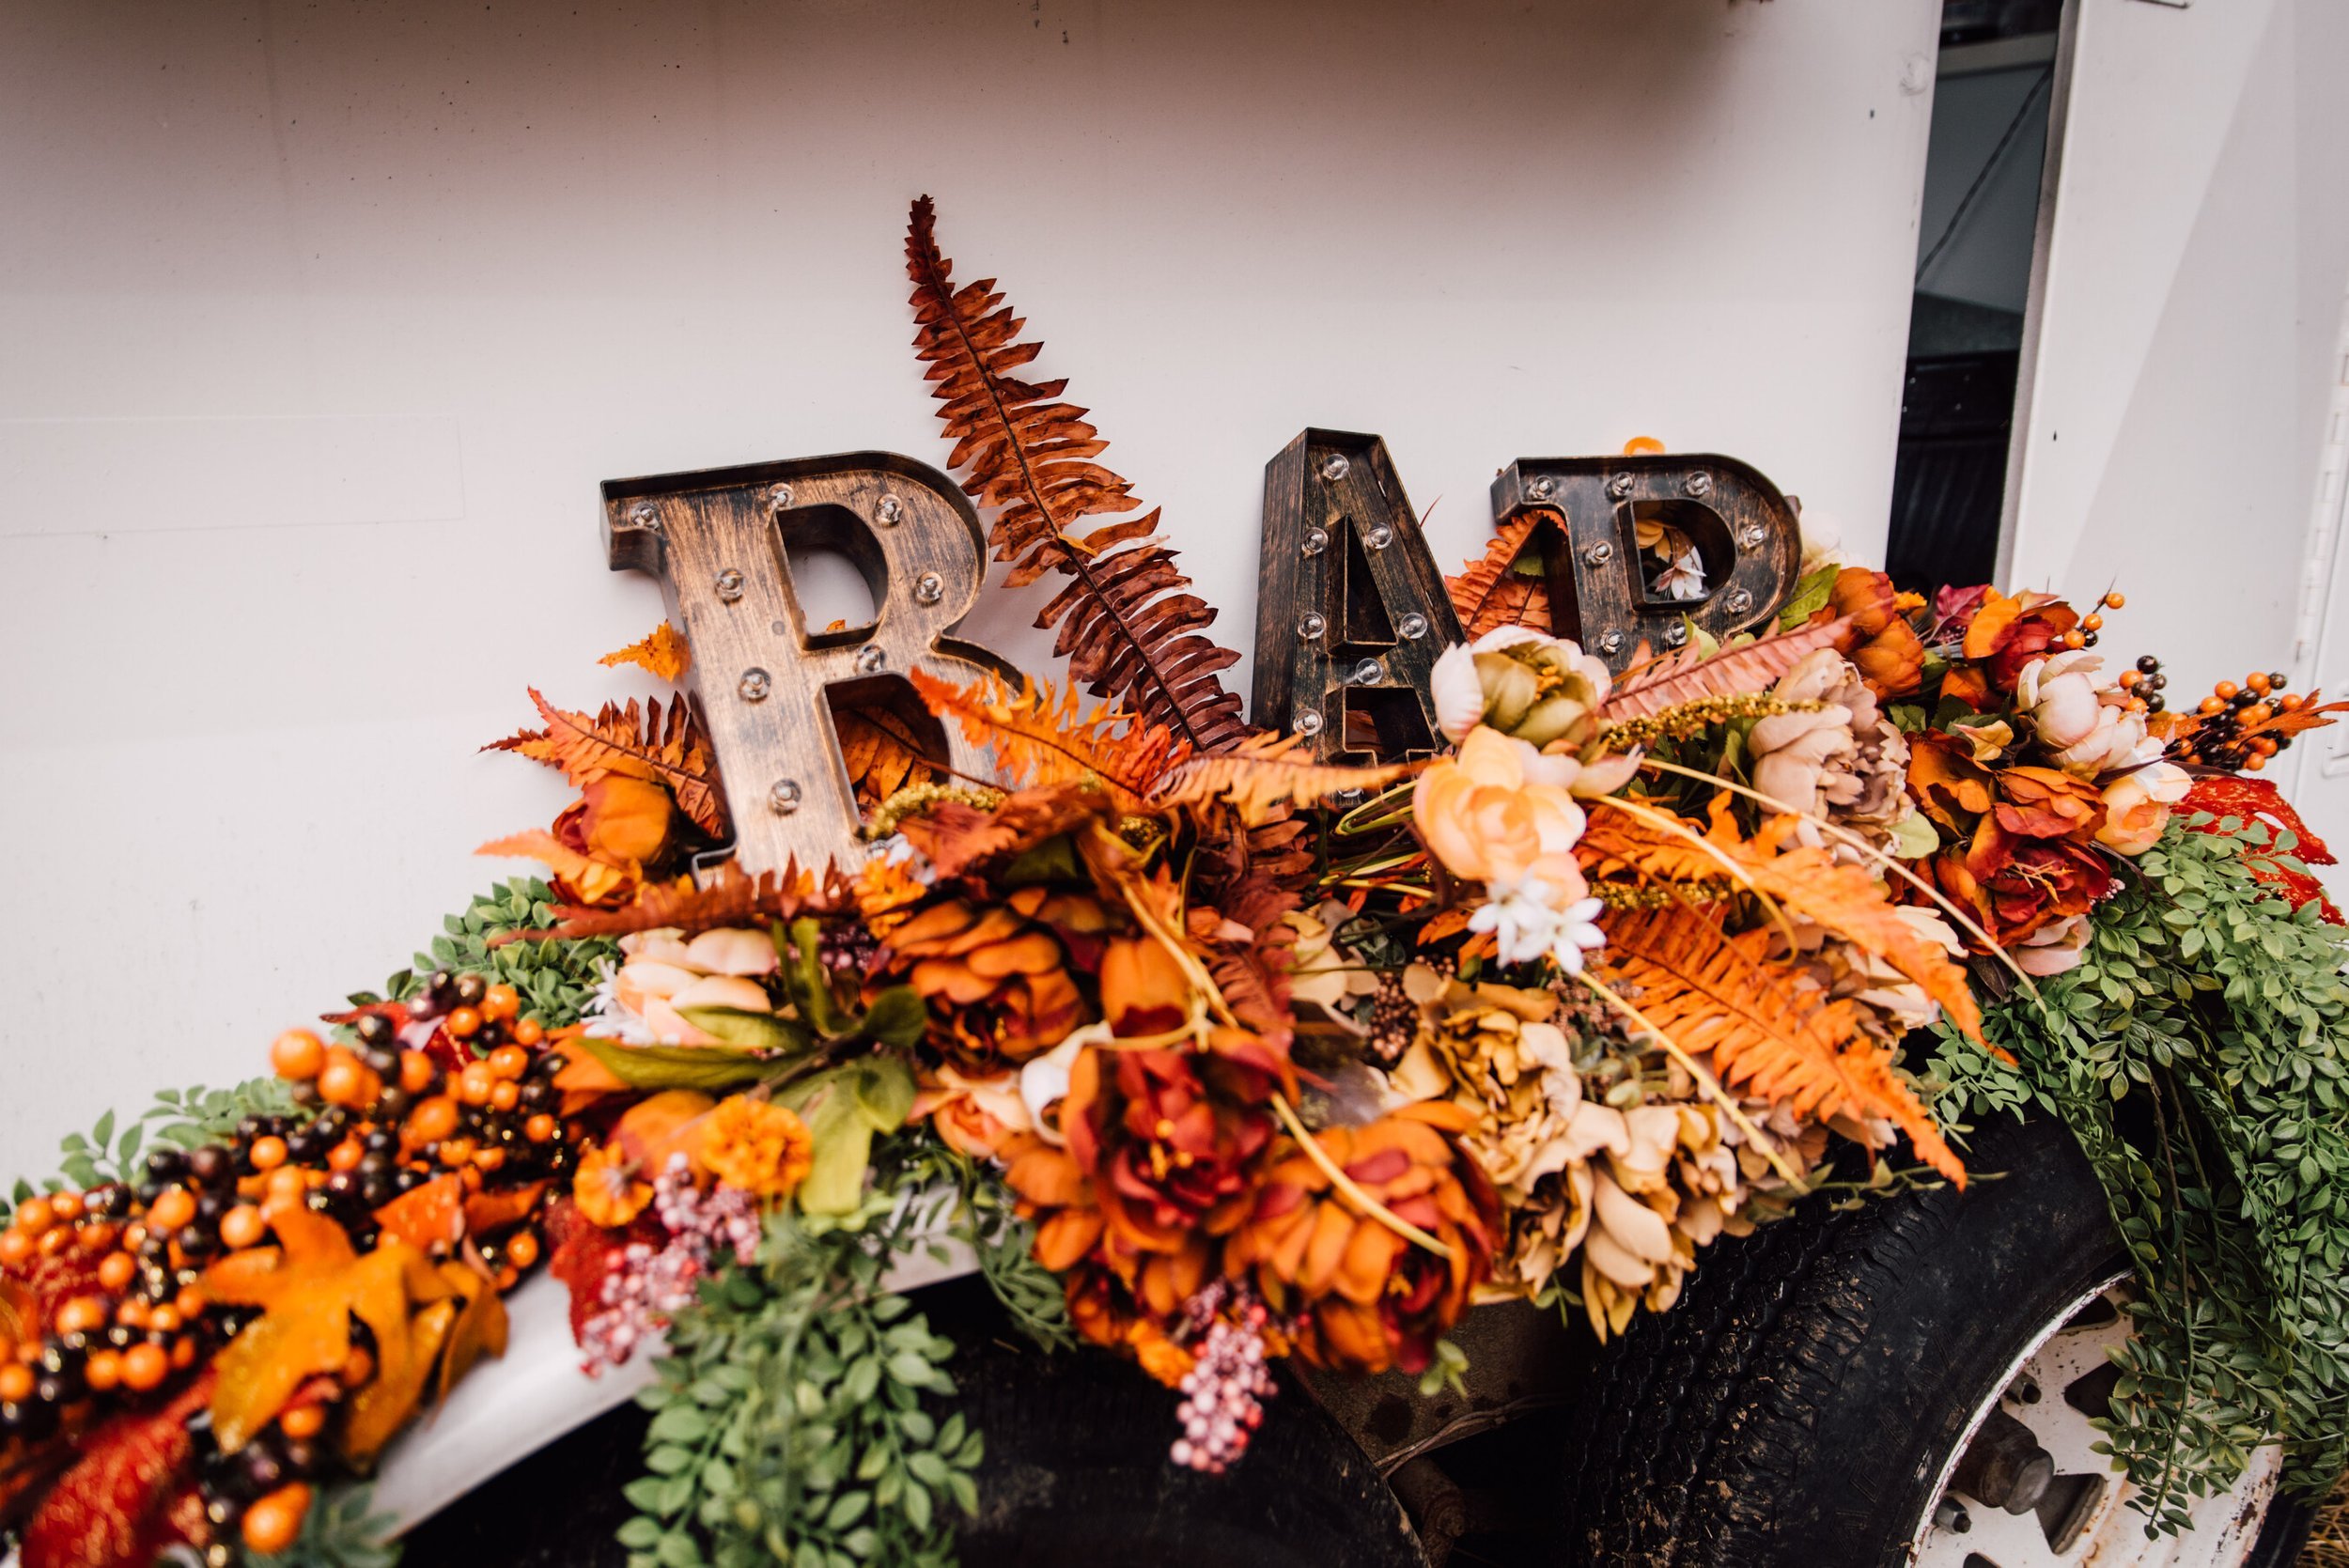  Rustic lit letters that spell out bar sit on top of a dried floral arrangement as part of the backyard wedding decor&nbsp; 